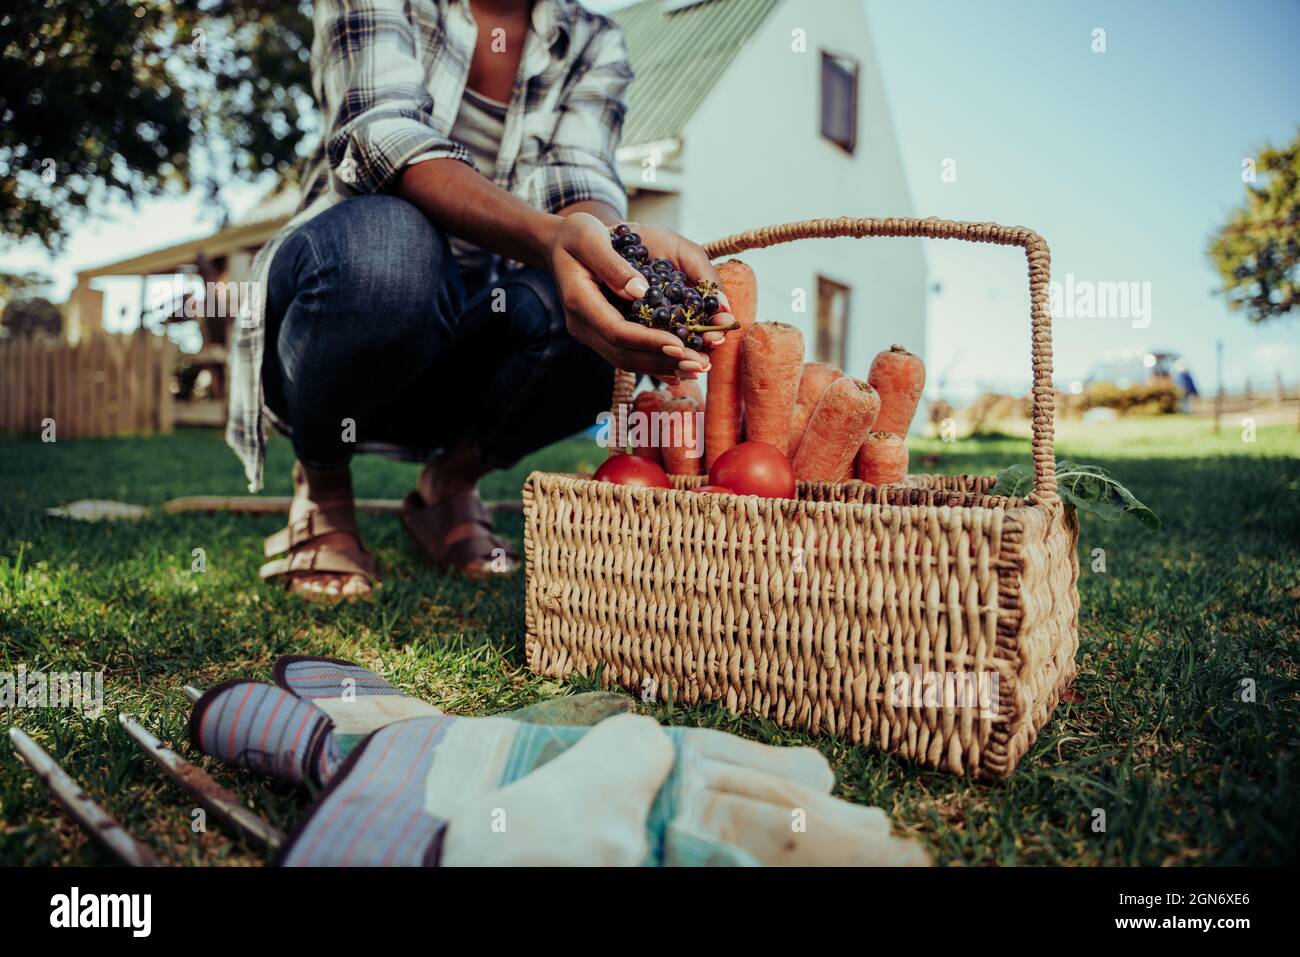 Close up mixed race female holding bunch of fresh grapes crouching down next to basket of fresh vegetables  Stock Photo